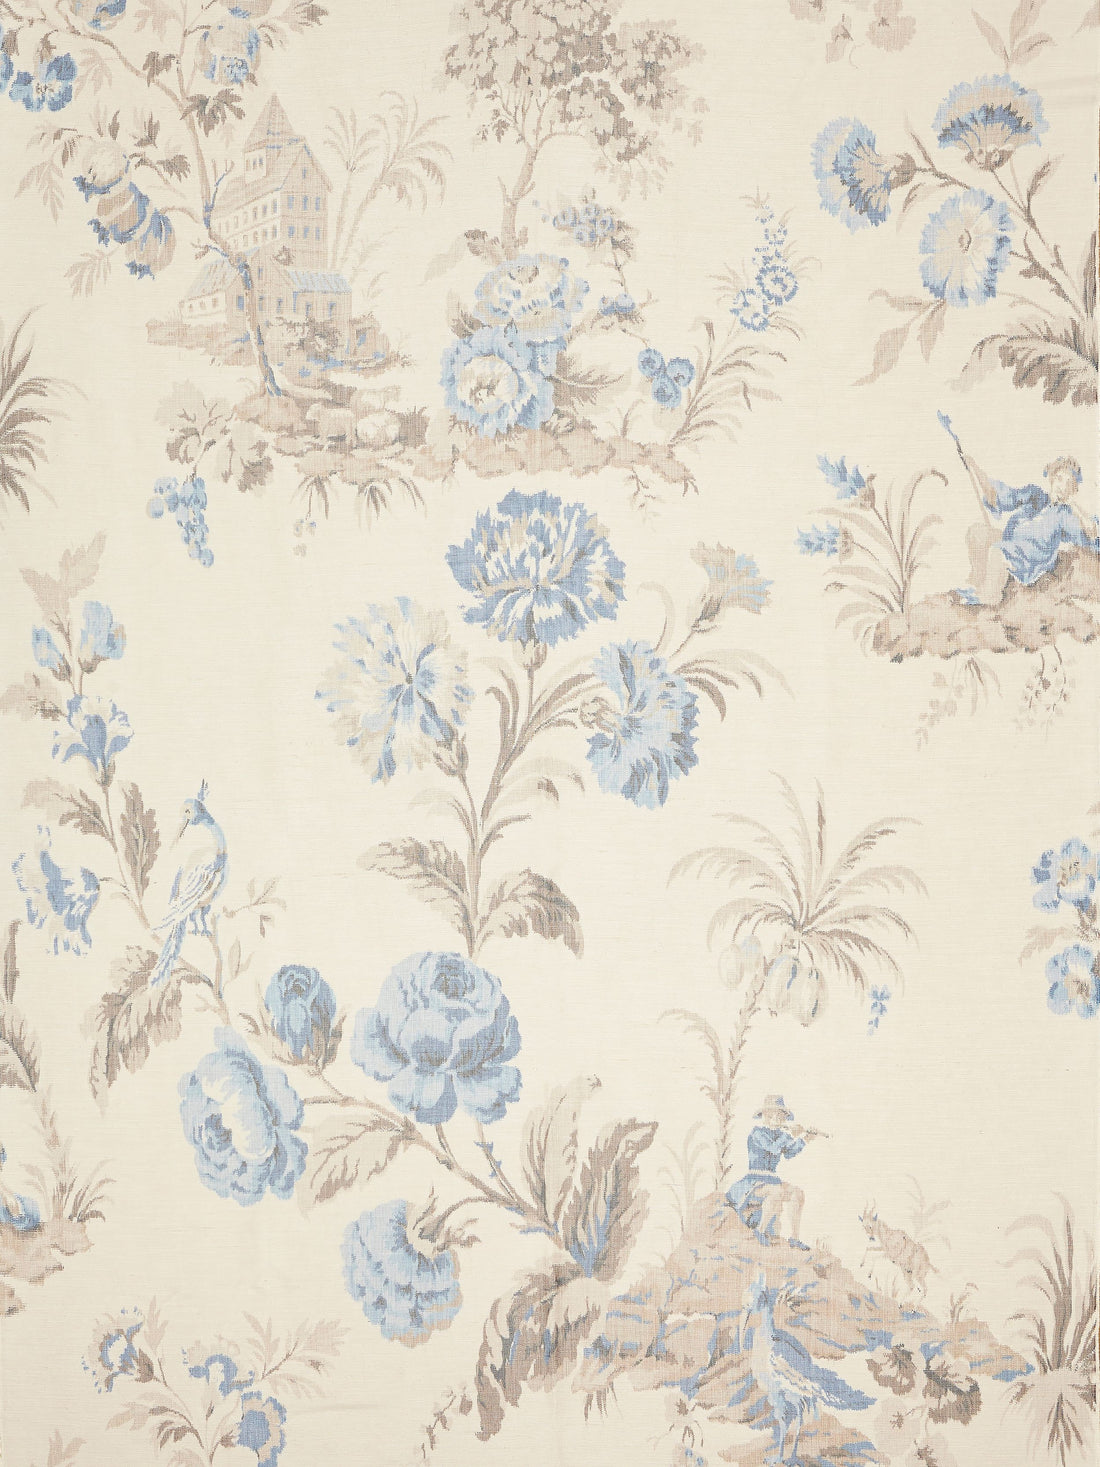 Somerset Silk Warp Print fabric in porcelain color - pattern number SC 000216585 - by Scalamandre in the Scalamandre Fabrics Book 1 collection